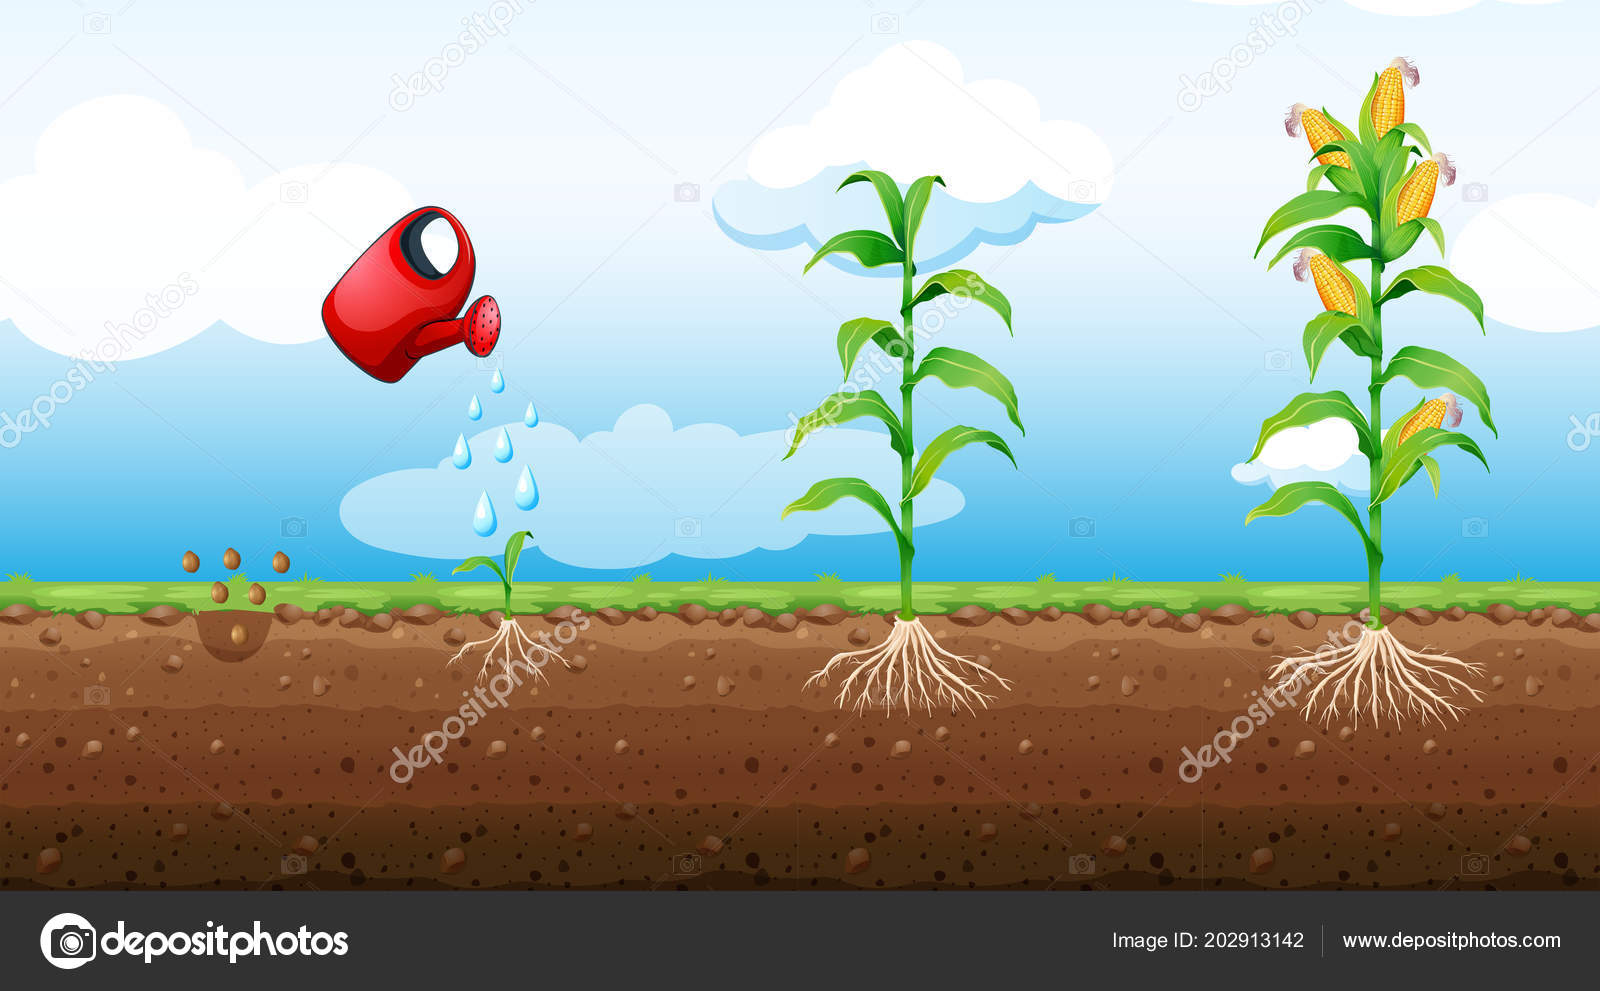 Growth stage Vectors, Clipart & Illustrations for Free Download